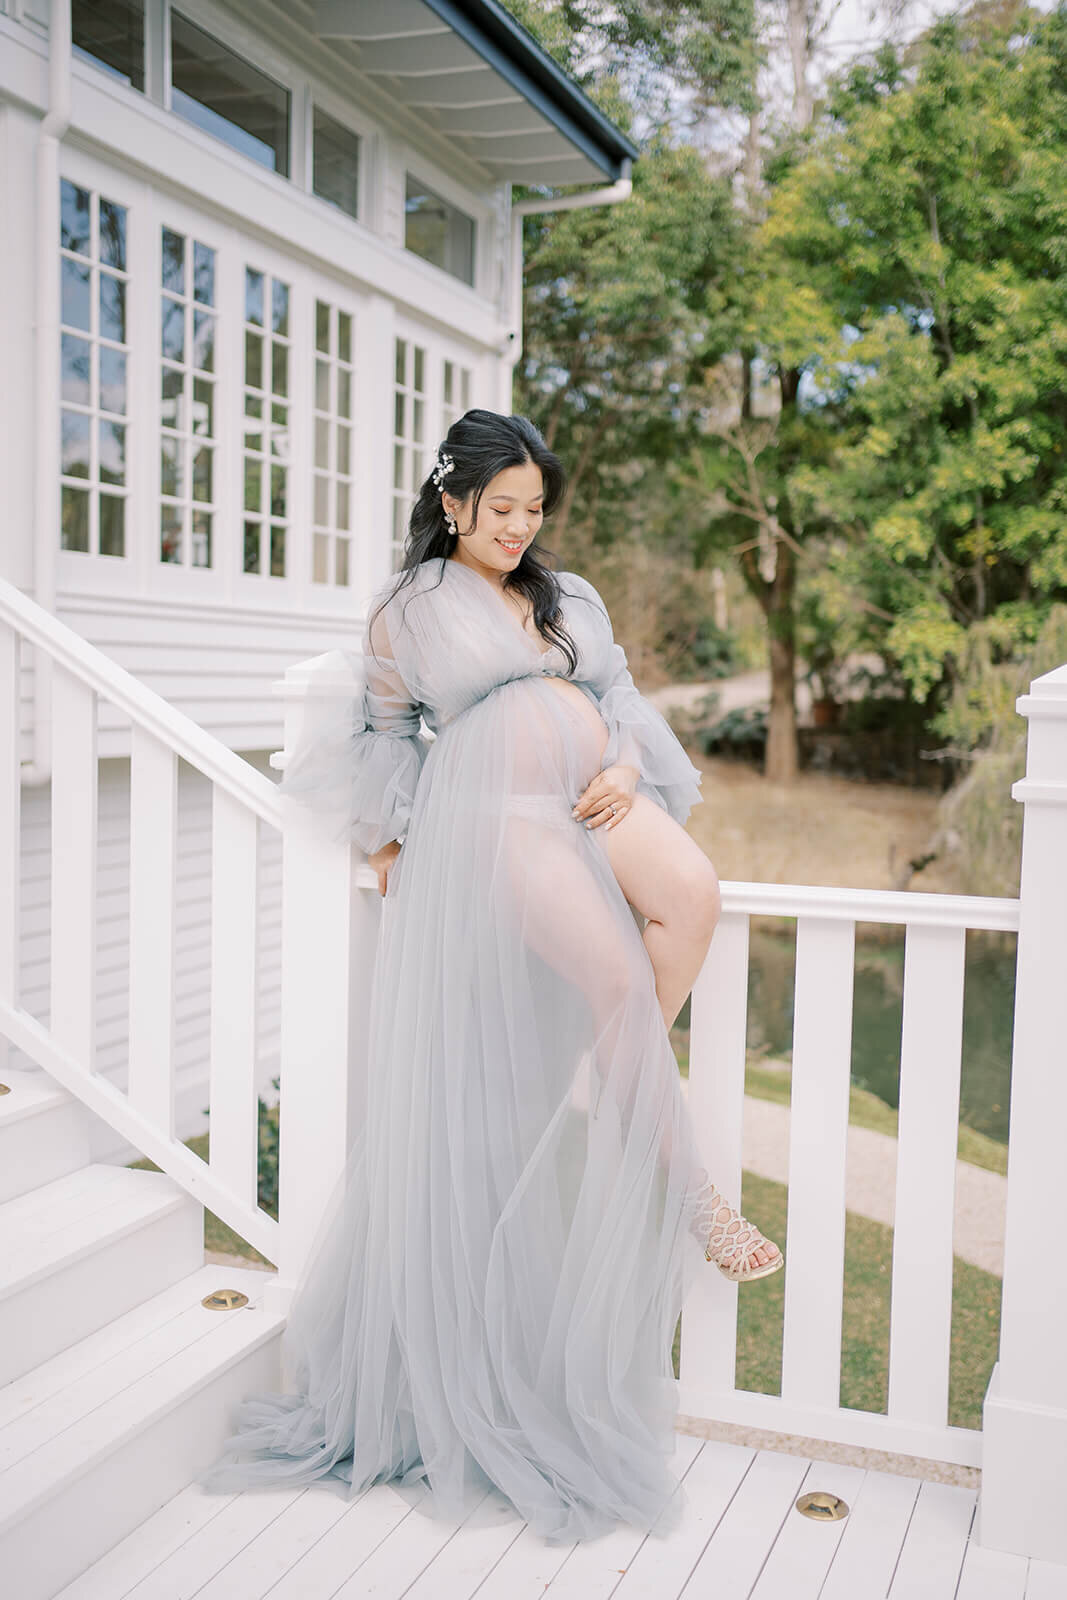 Cherish the anticipation of a baby's arrival with a mum in a stunning blue tulle gown at Gold Coast's Kwila Lodge.